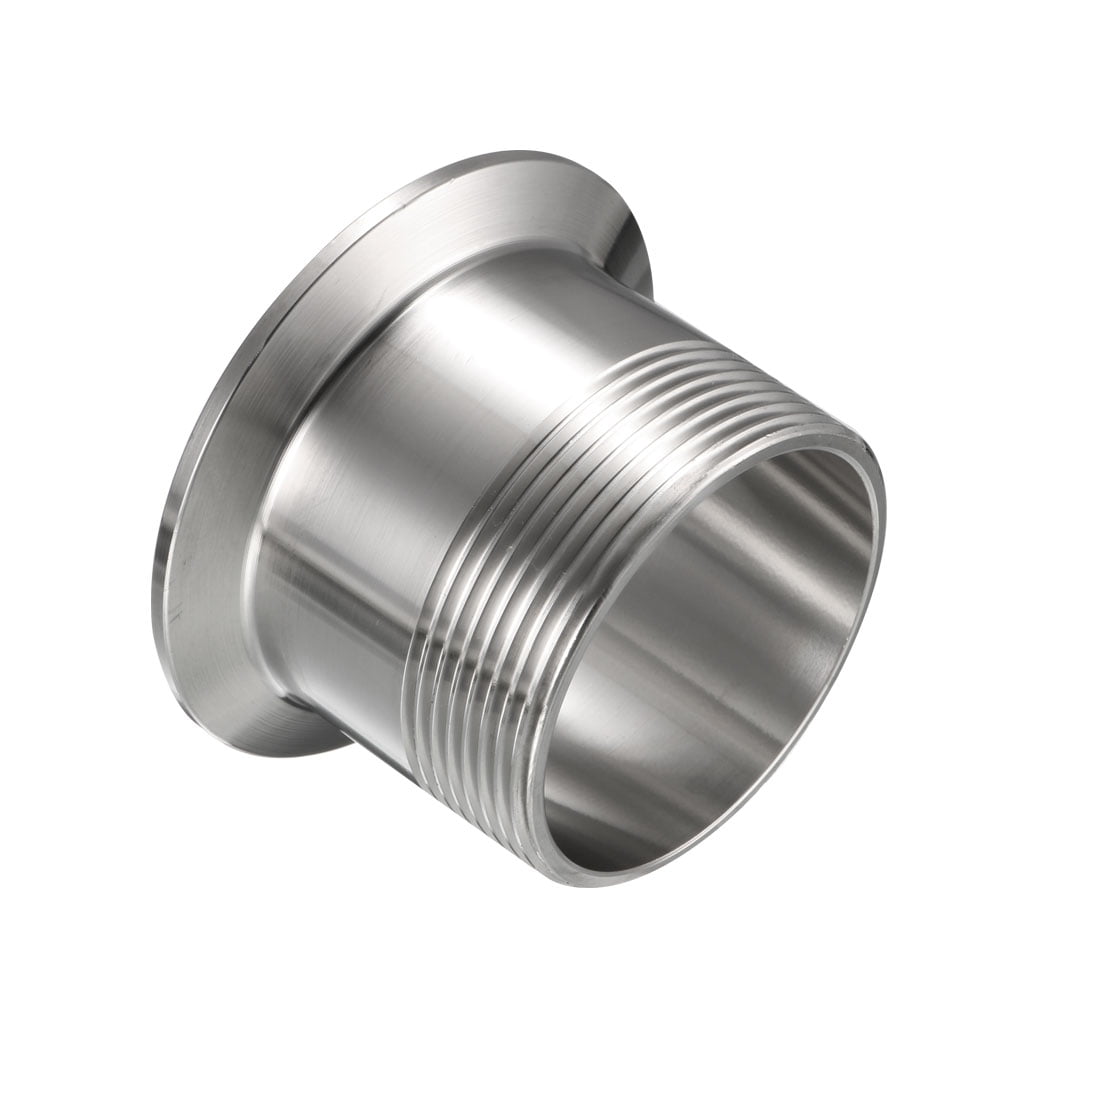 uxcell 2NPT Male Threaded Pipe Fitting to CLAMP OD 77.5mm Ferrule